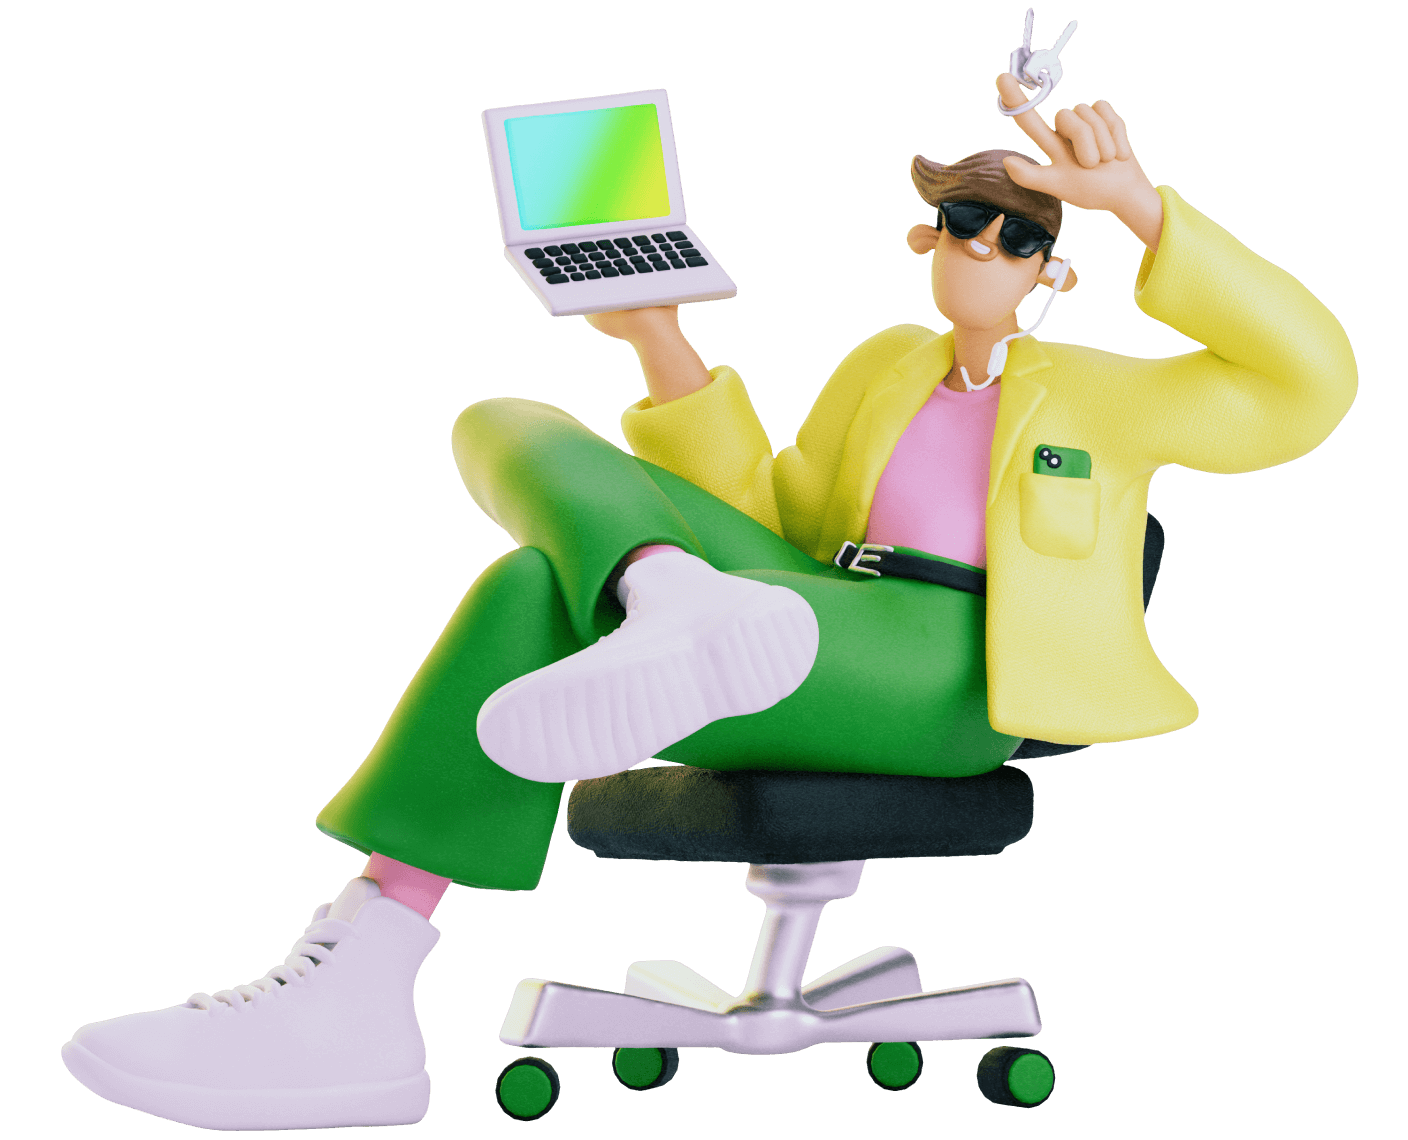 A stylish 3D character holding a laptop